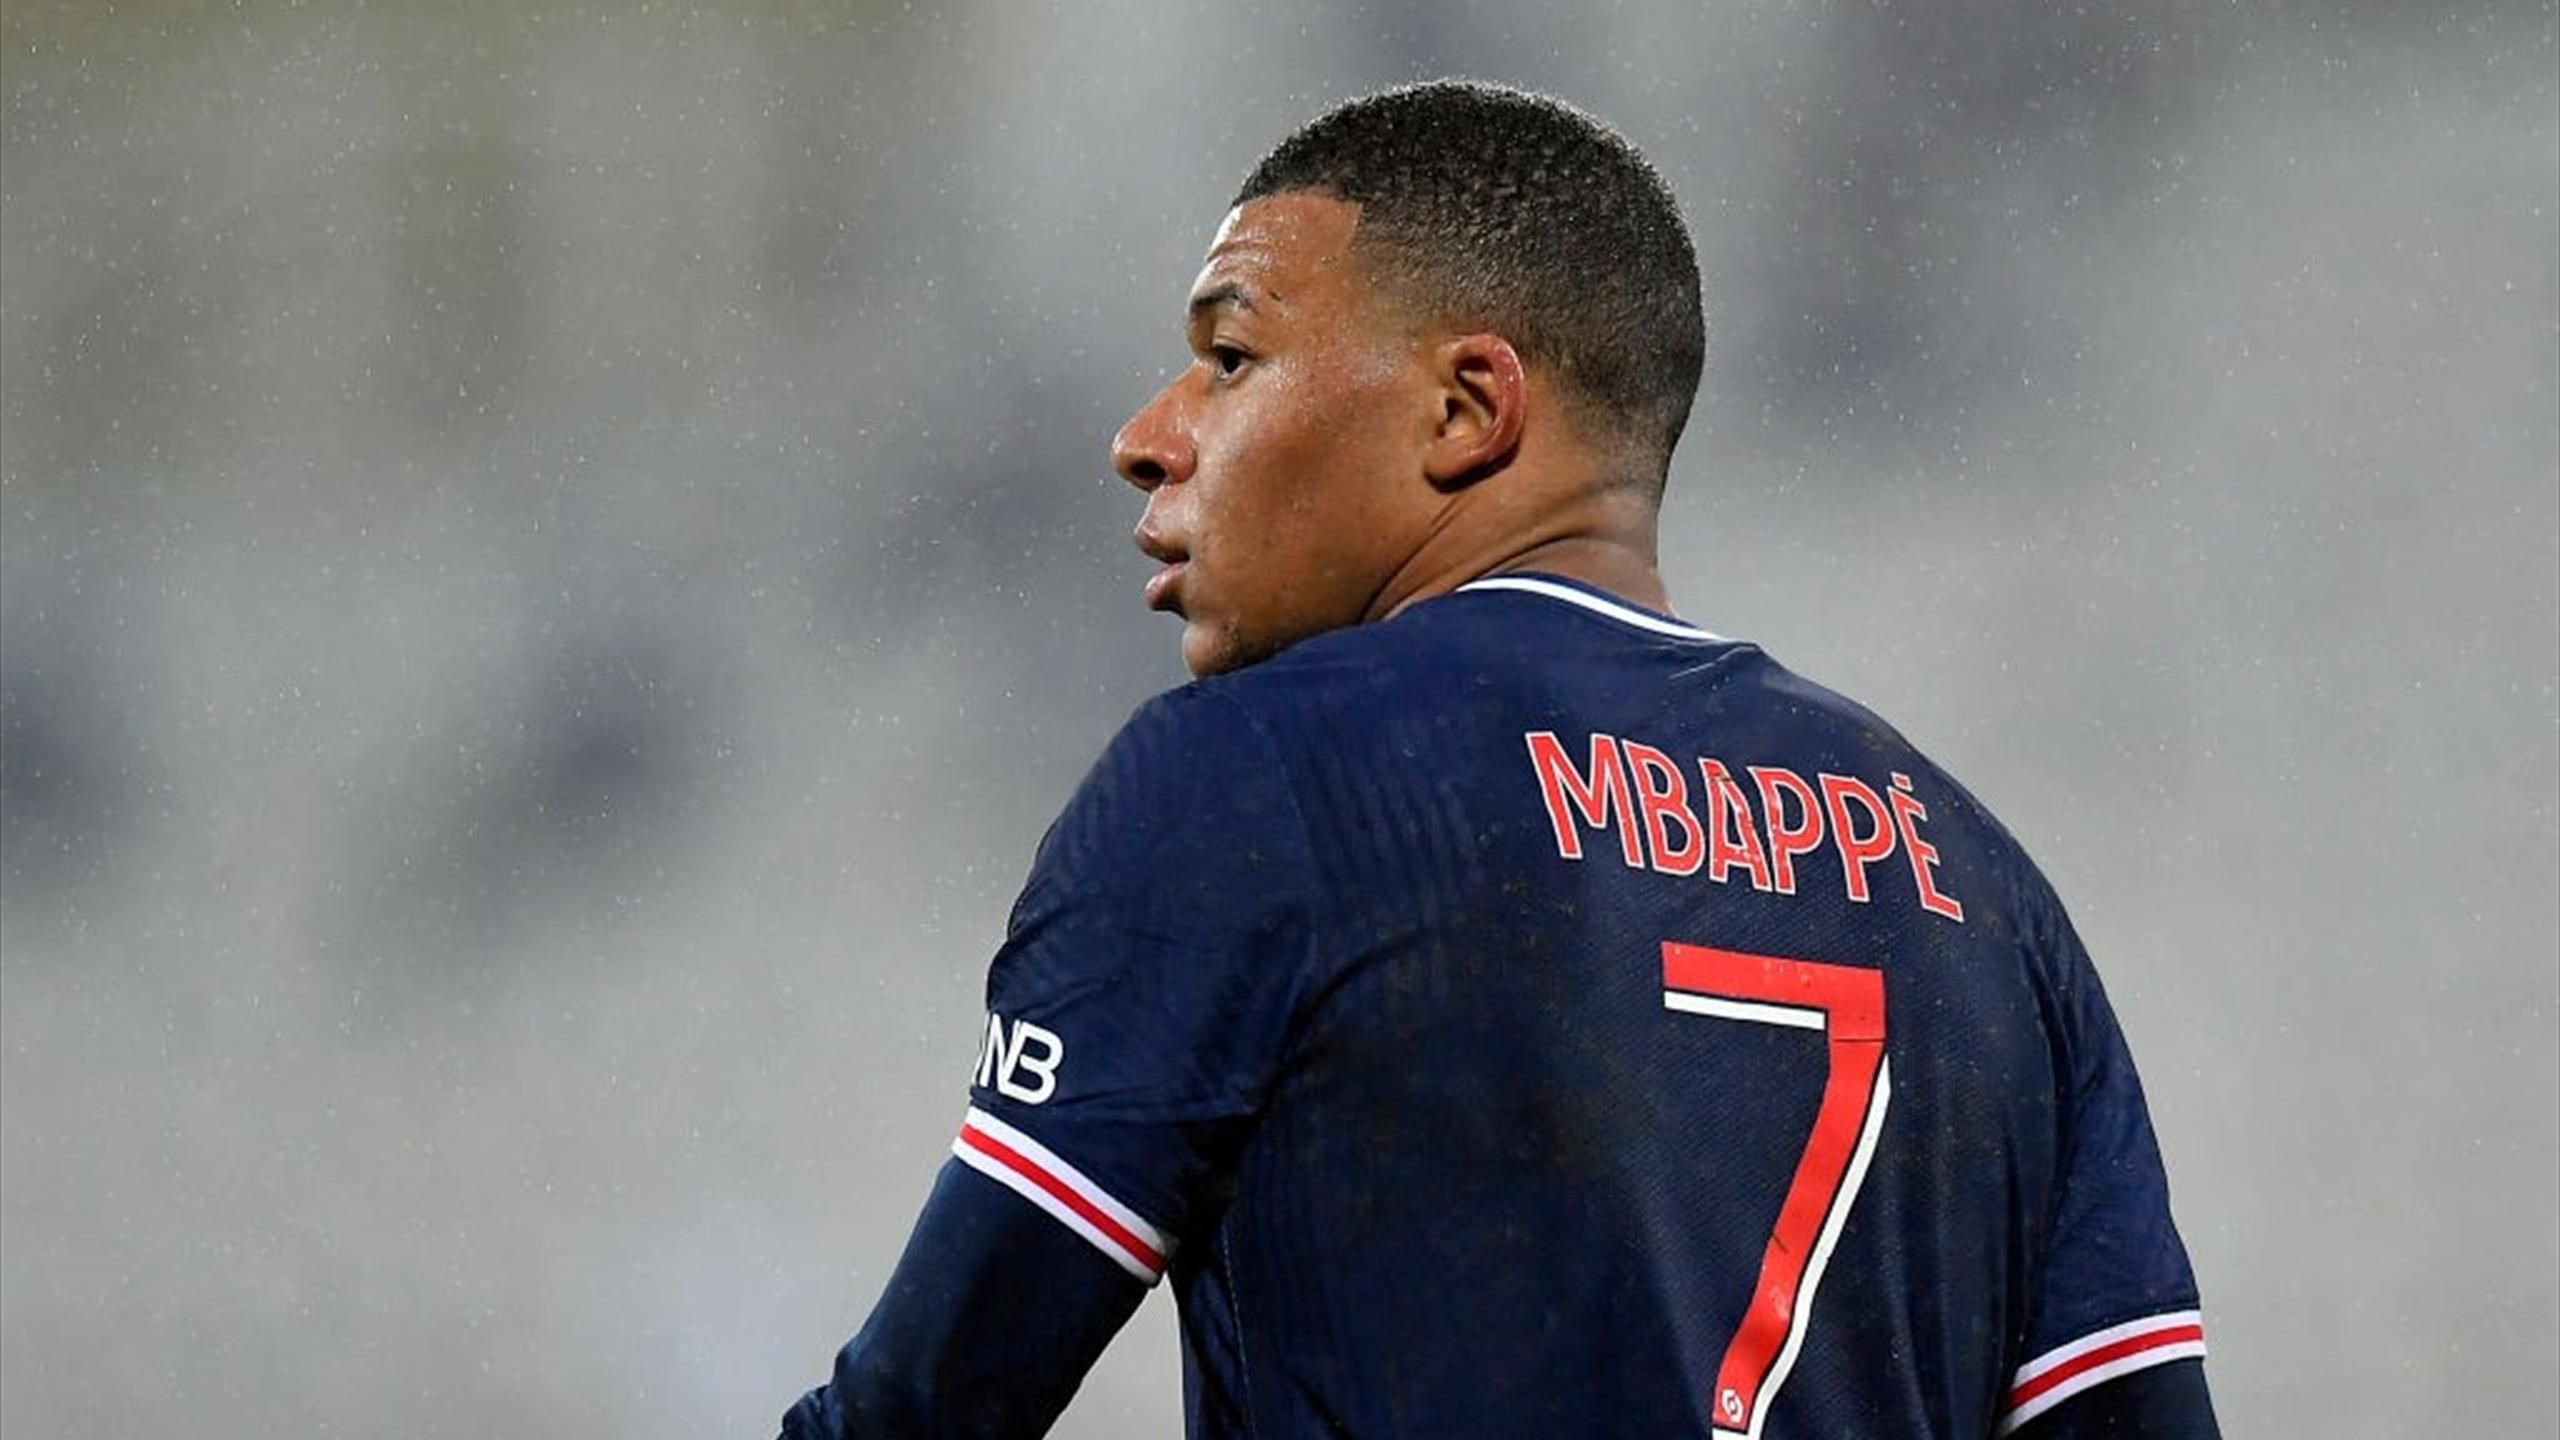 Transfer news and rumours LIVE - Real Madrid want a sign from Kylian Mbappe 